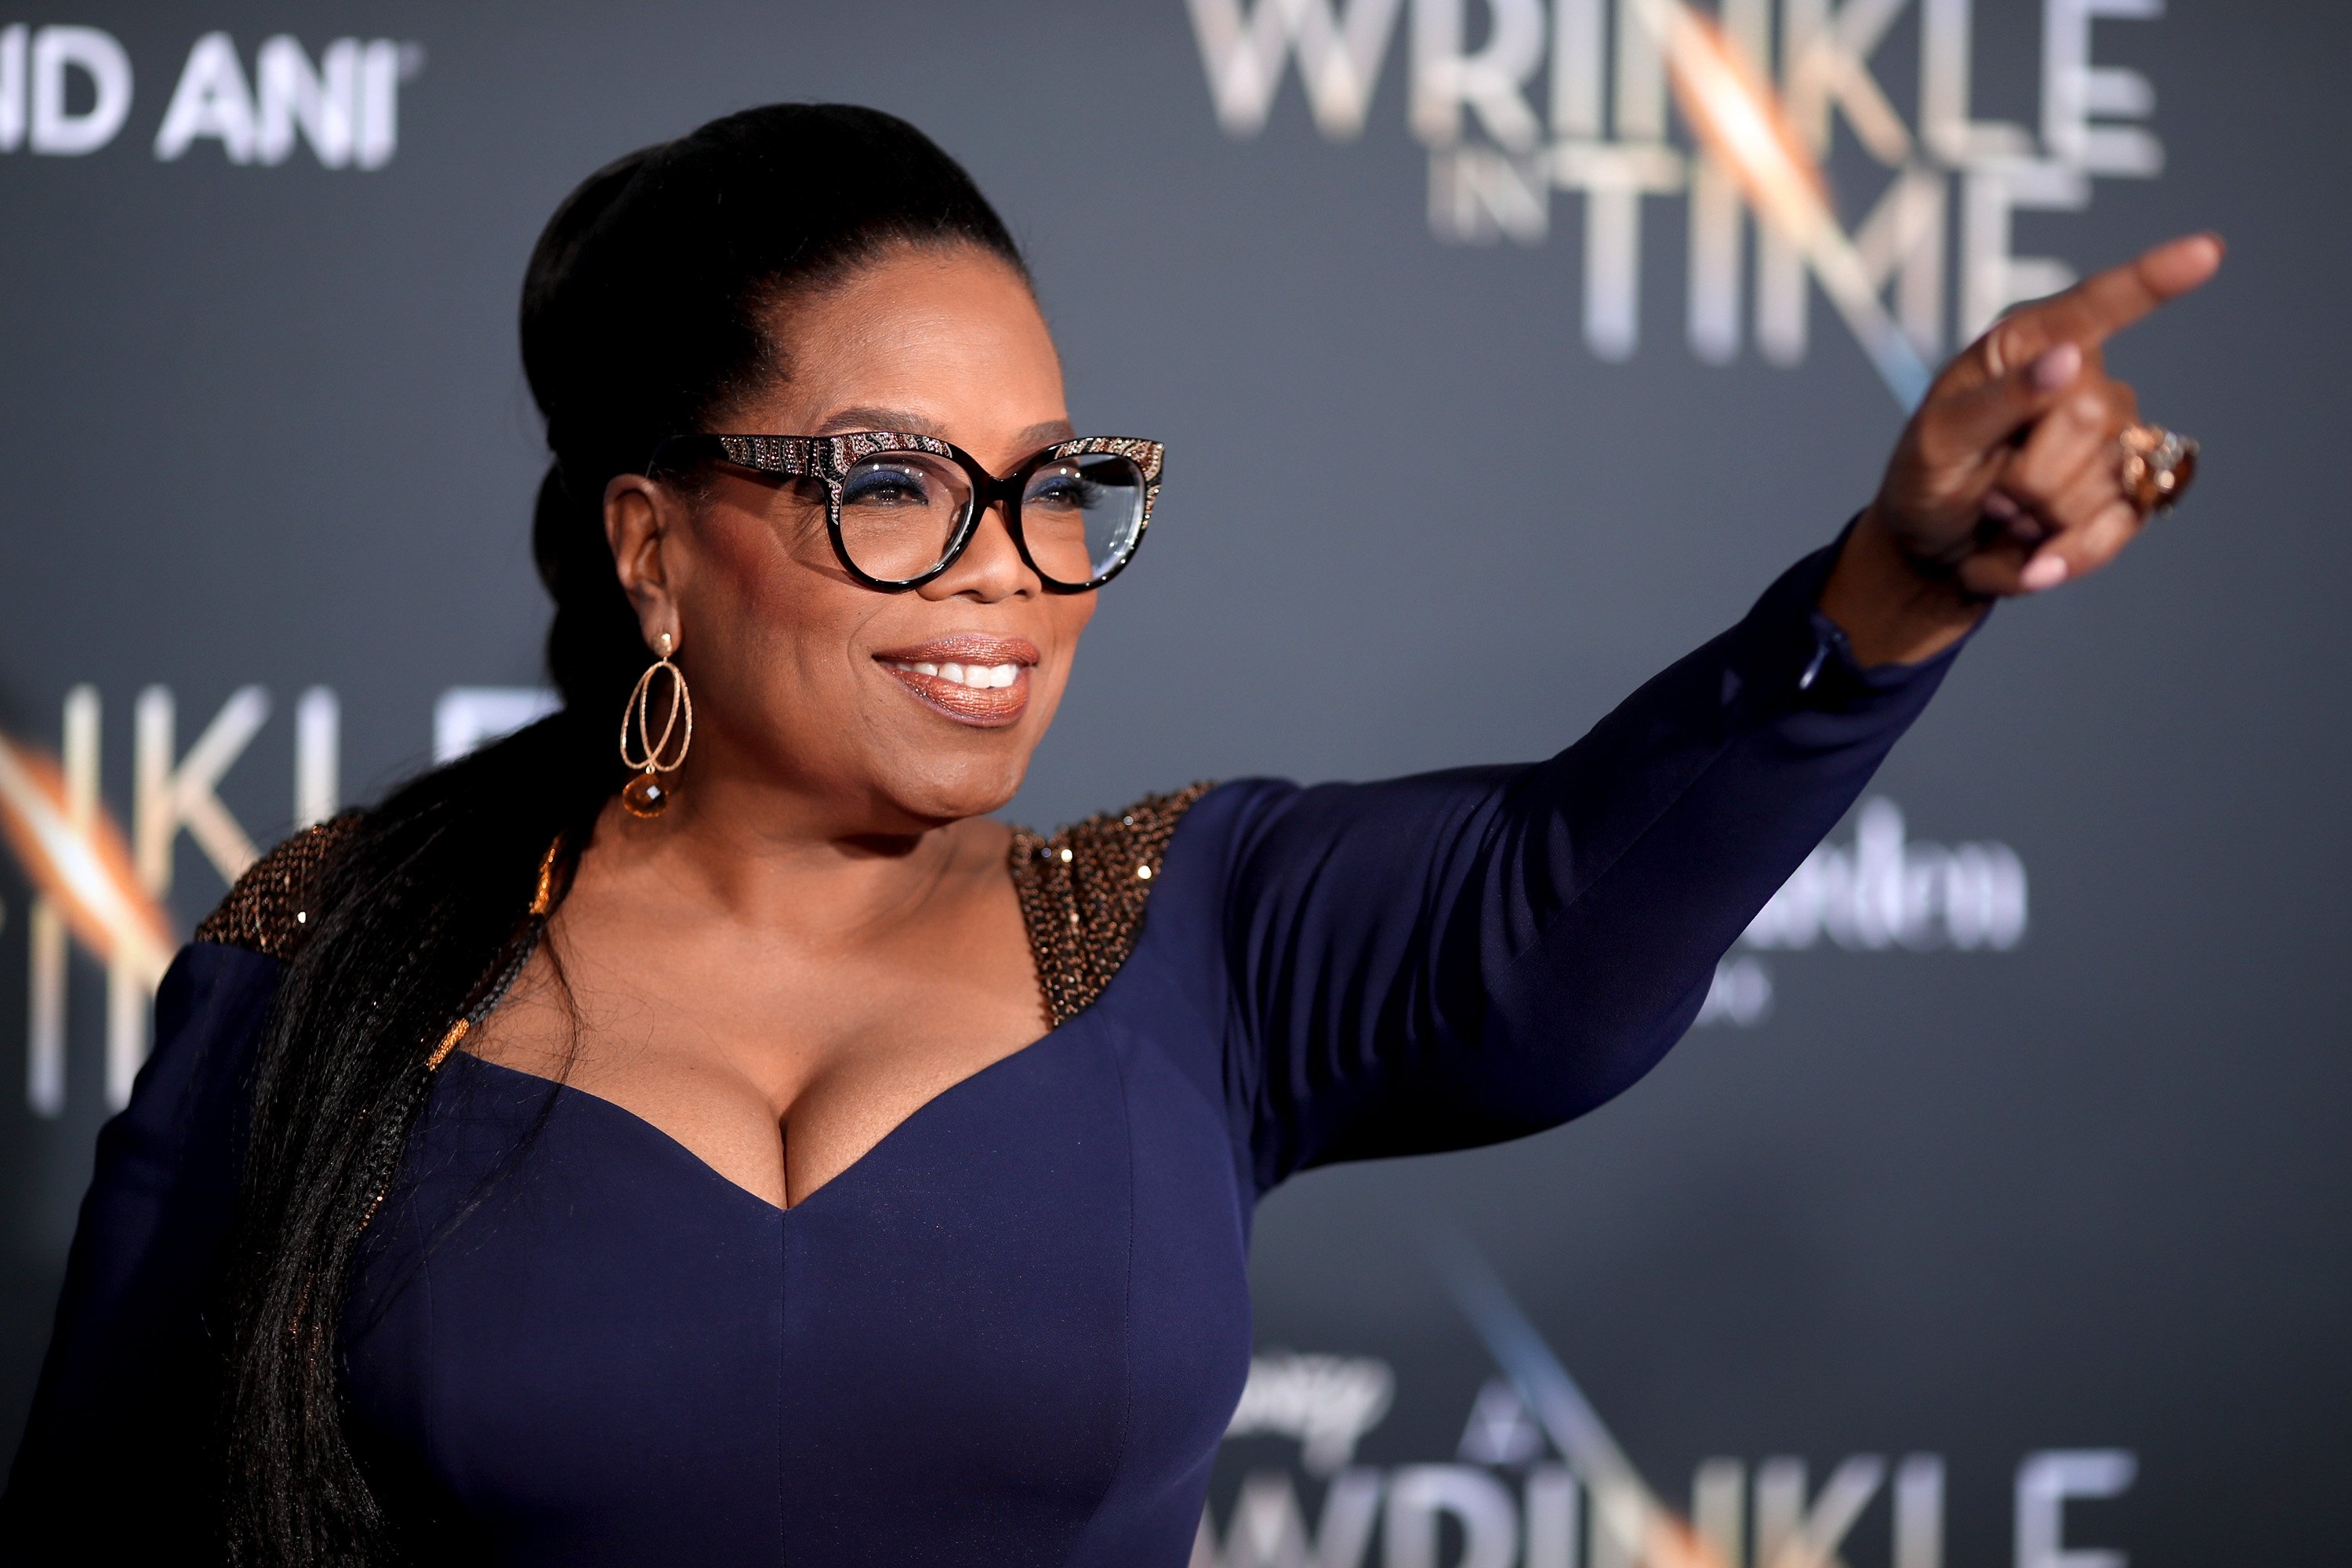 Oprah Winfrey attends the premiere of Disney's "A Wrinkle In Time" at the El Capitan Theatre on February 26, 2018 |Photo: Images